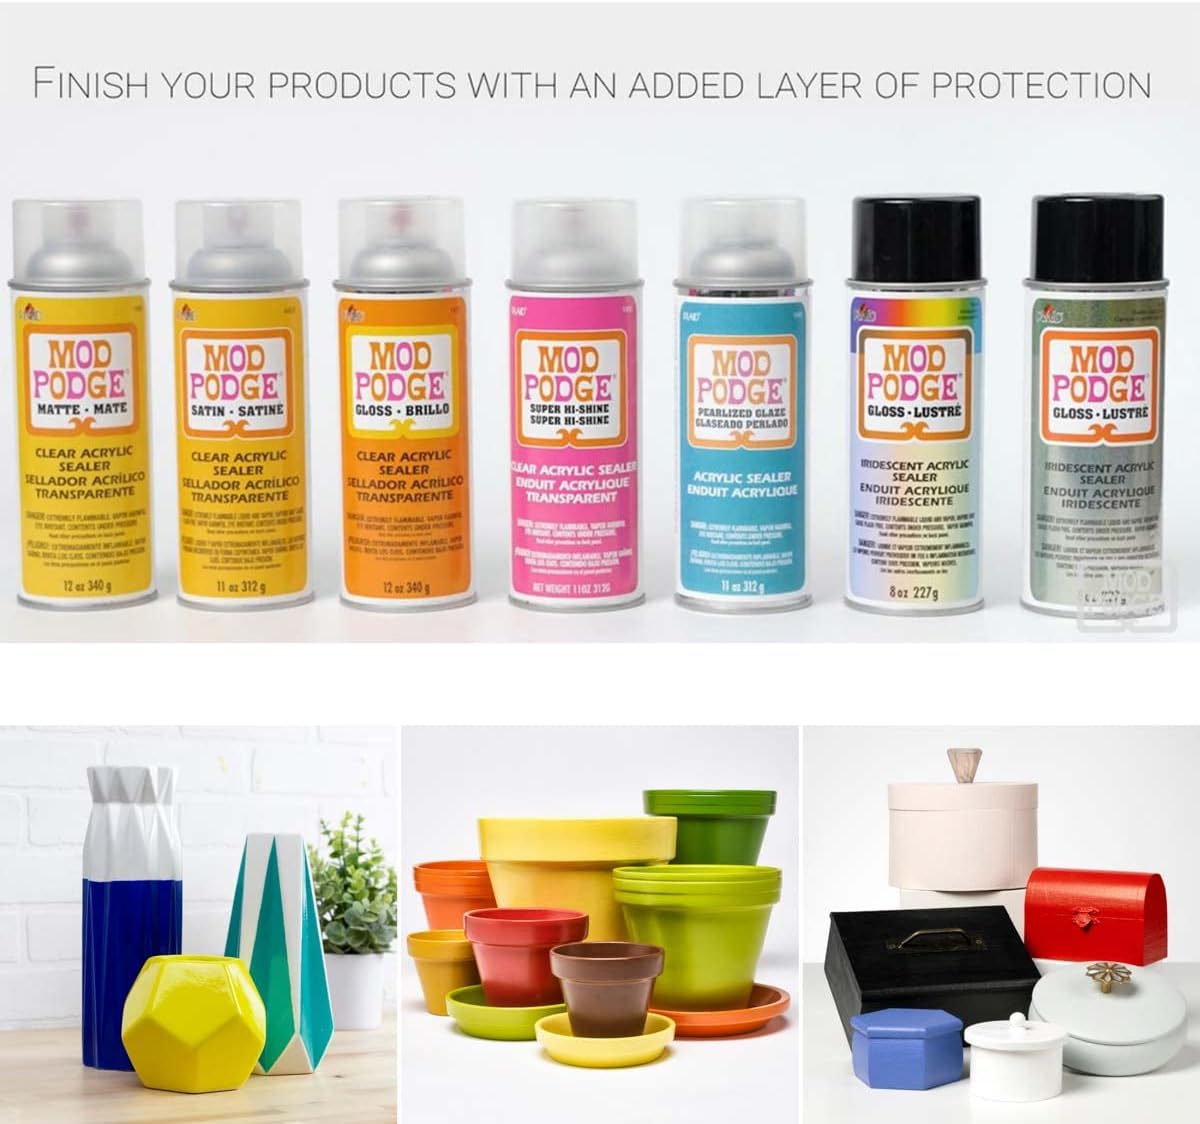 Mod Podge Spray Acrylic Sealer that is Specifically Formulated to Seal —  Grand River Art Supply